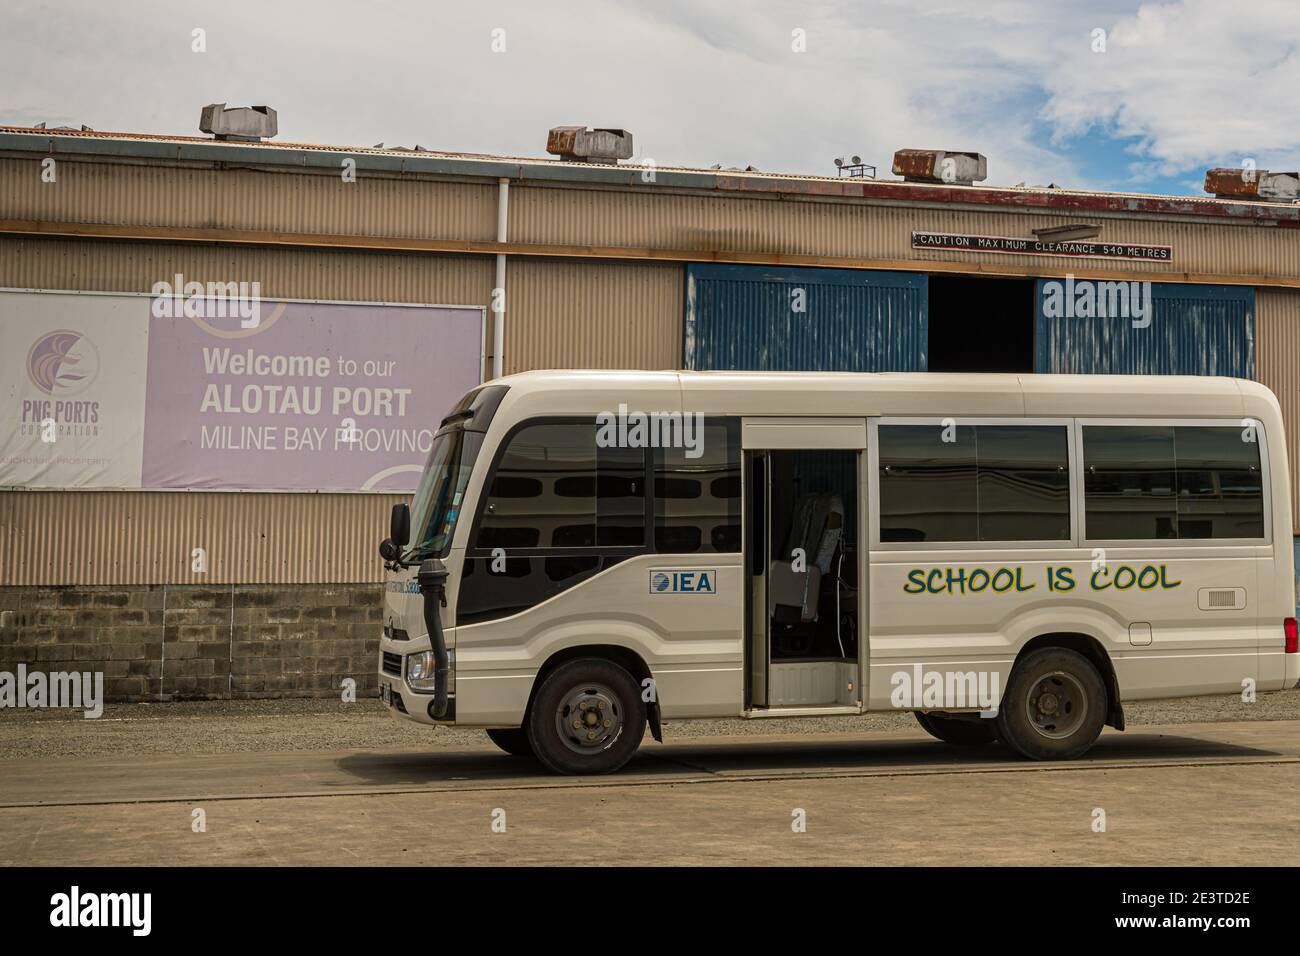 School bus with the label 'School is cool' in the port of Alotau, Papua New Guinea Stock Photo